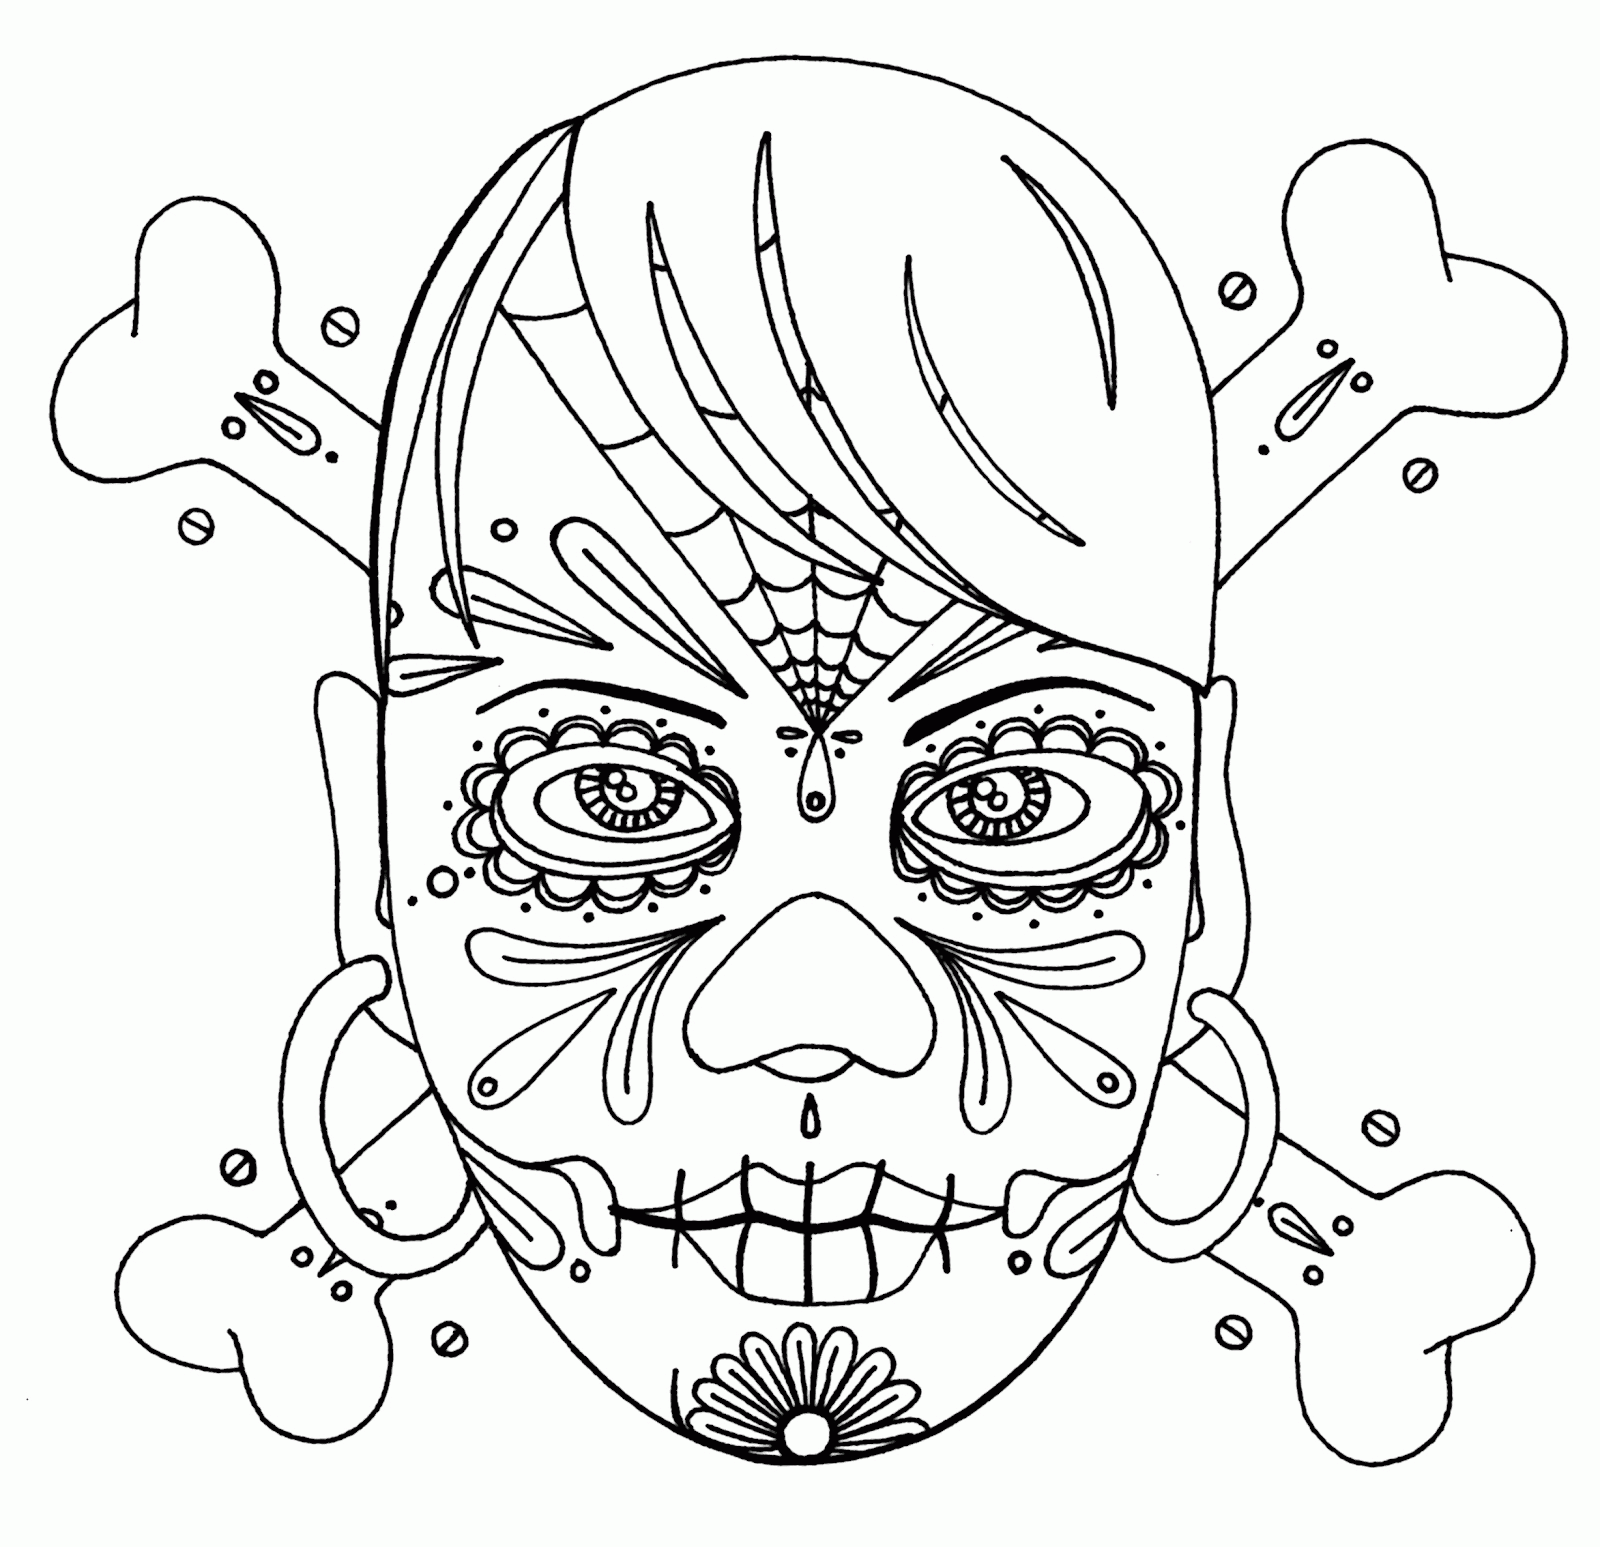 Coloring Pages Of Roses And Skulls - Coloring